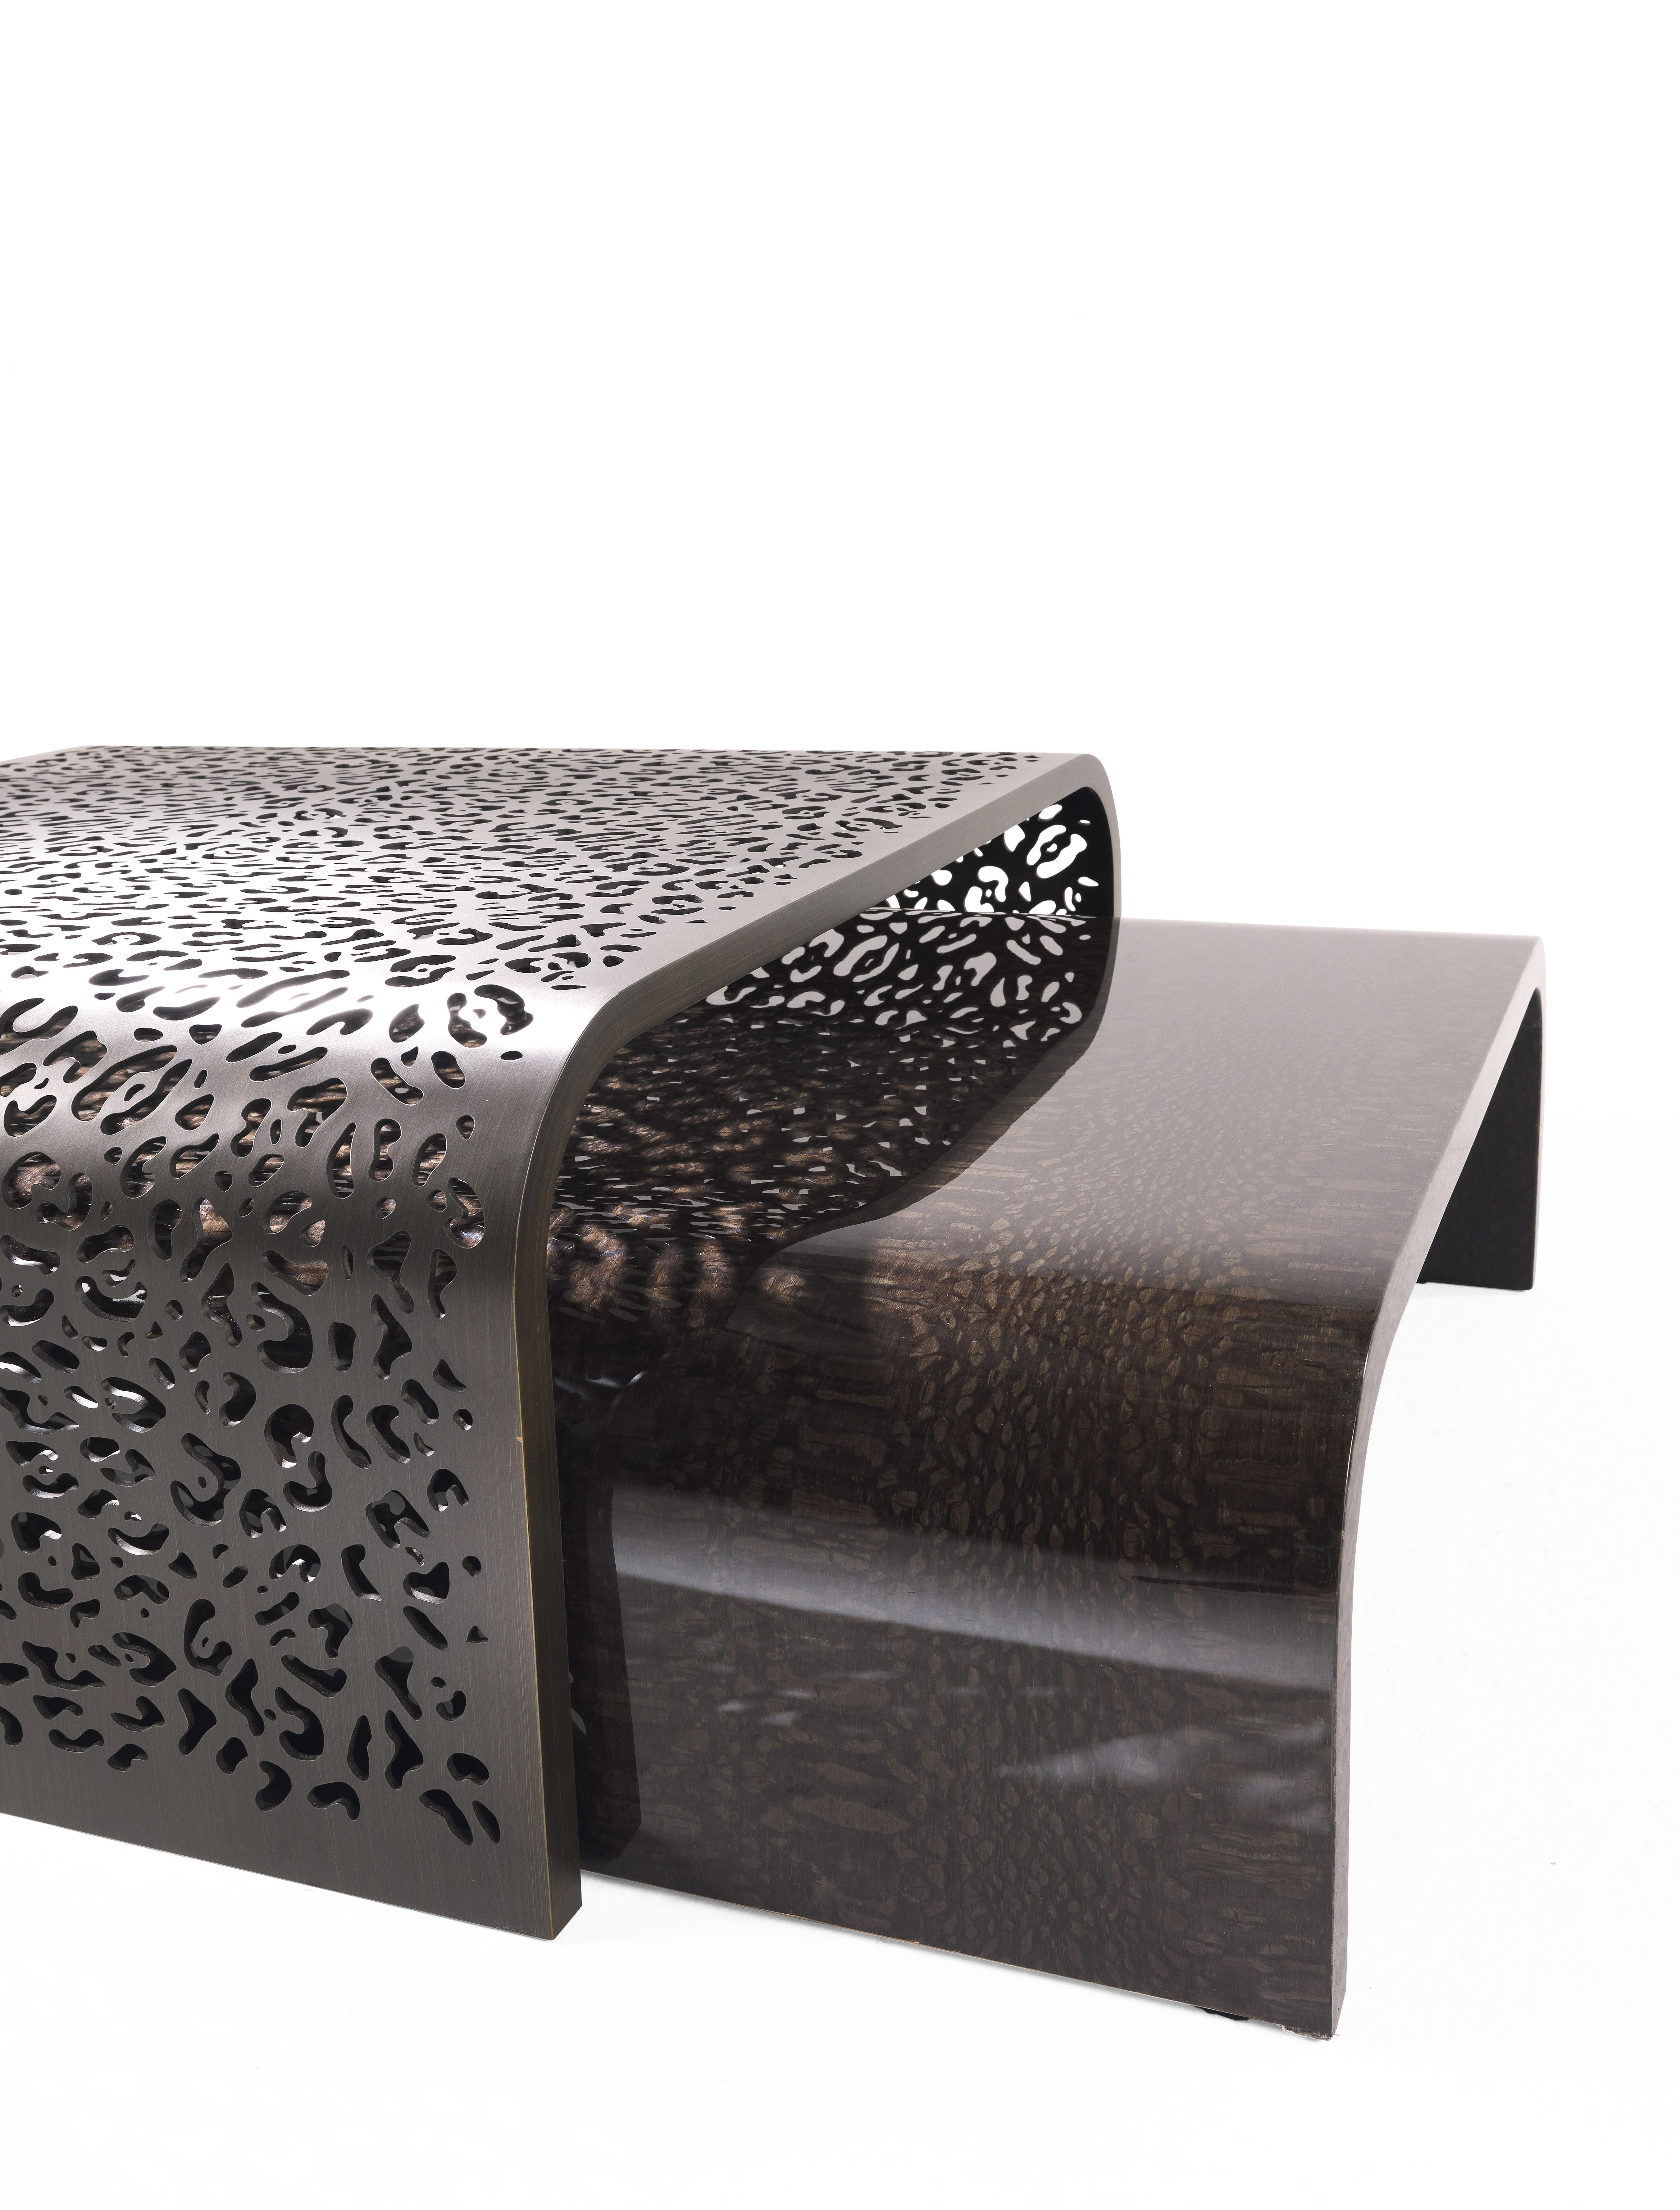 Contemporary 21st Century Watamu Central Table in Carbalho by Roberto Cavalli Home Interiors  For Sale